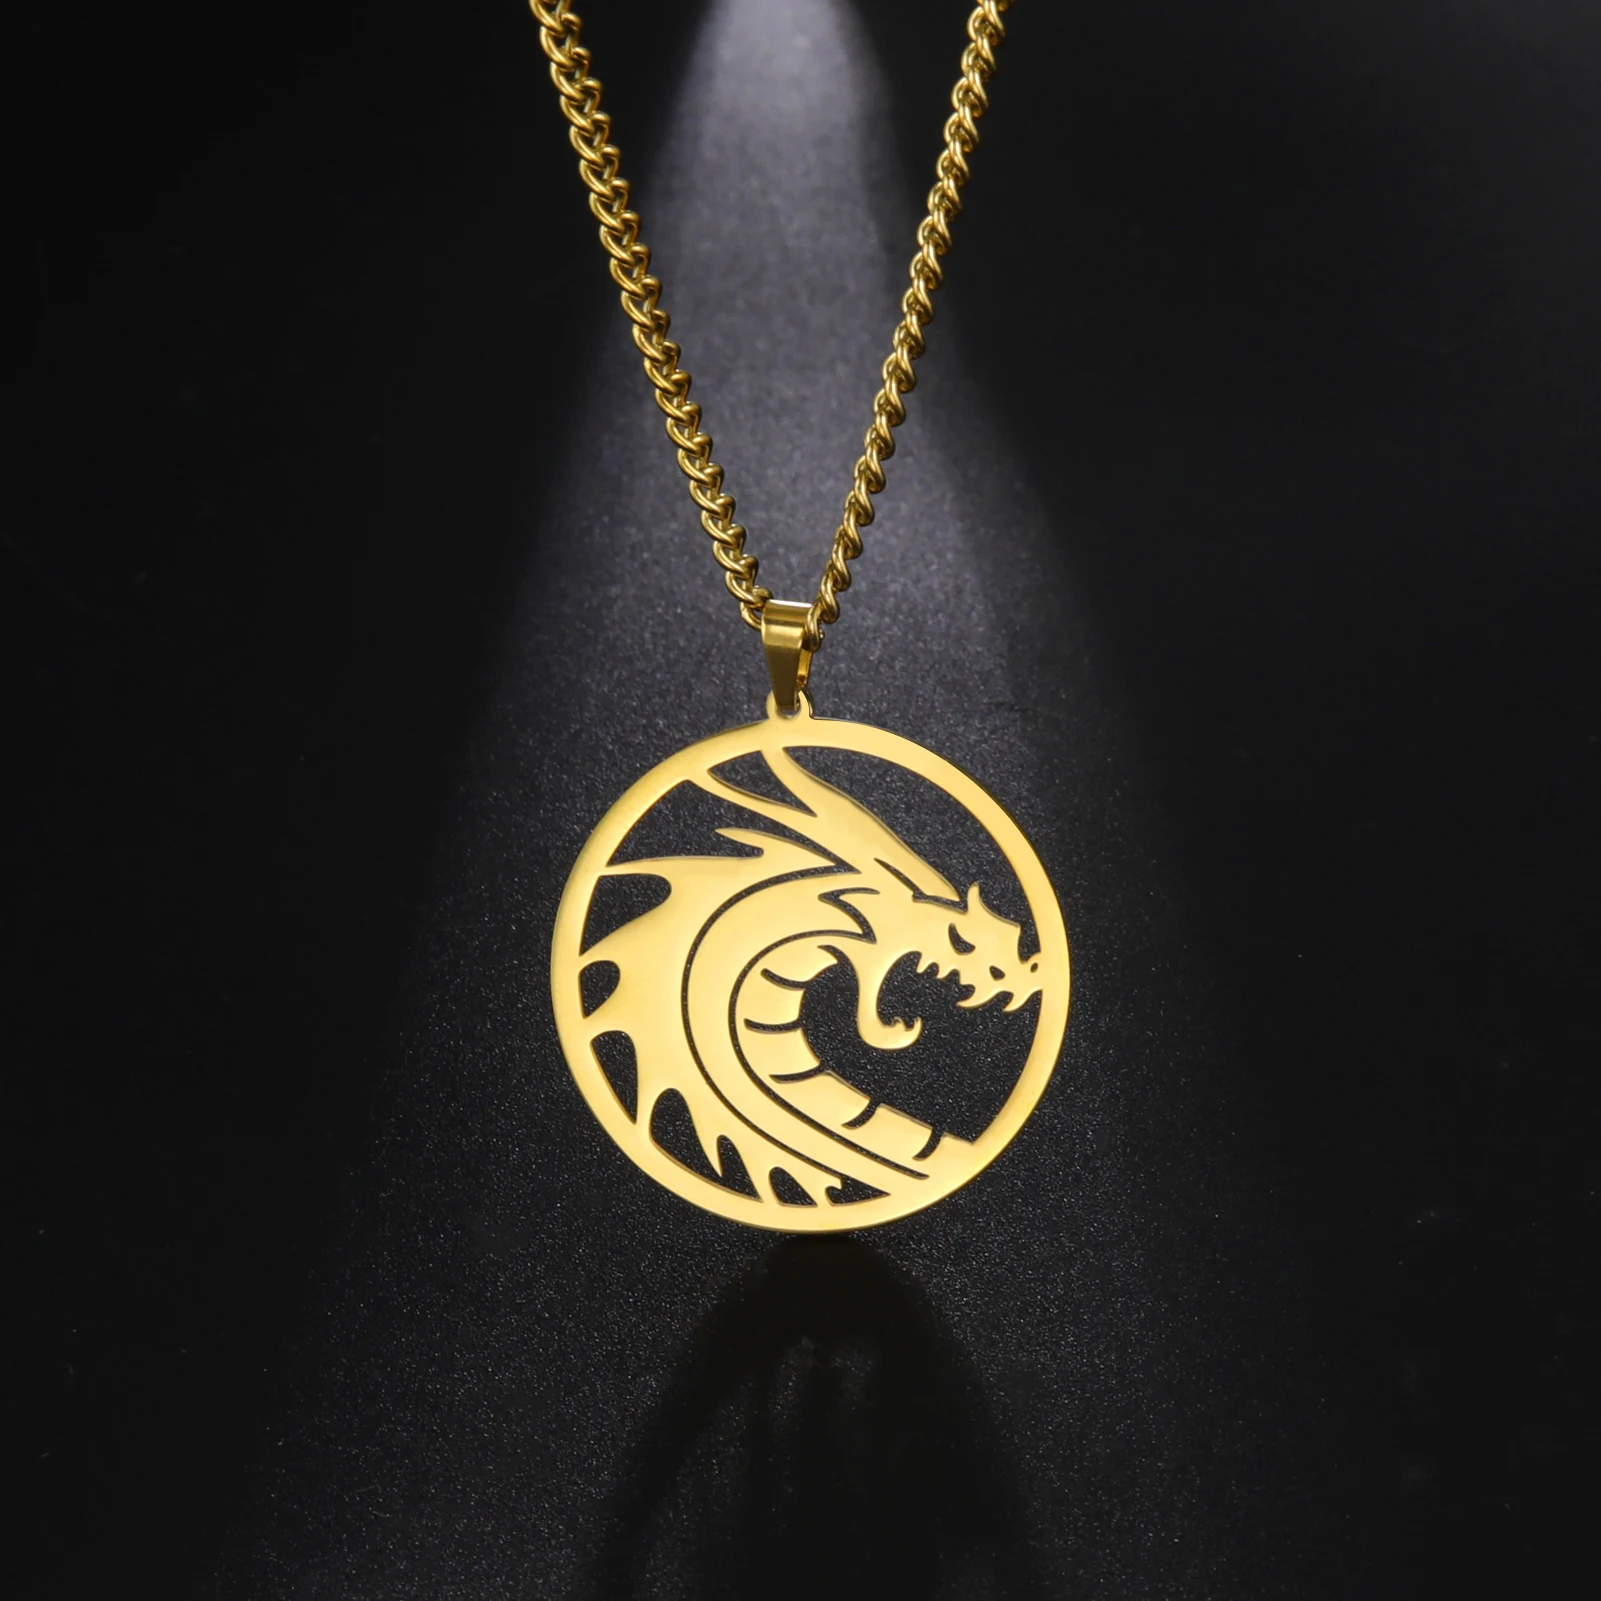 Amaxer Ancient Dragon Pendants Round Chain Necklace Stainless Steel For Women Men Gold Color Power Amulet Collier Jewelry